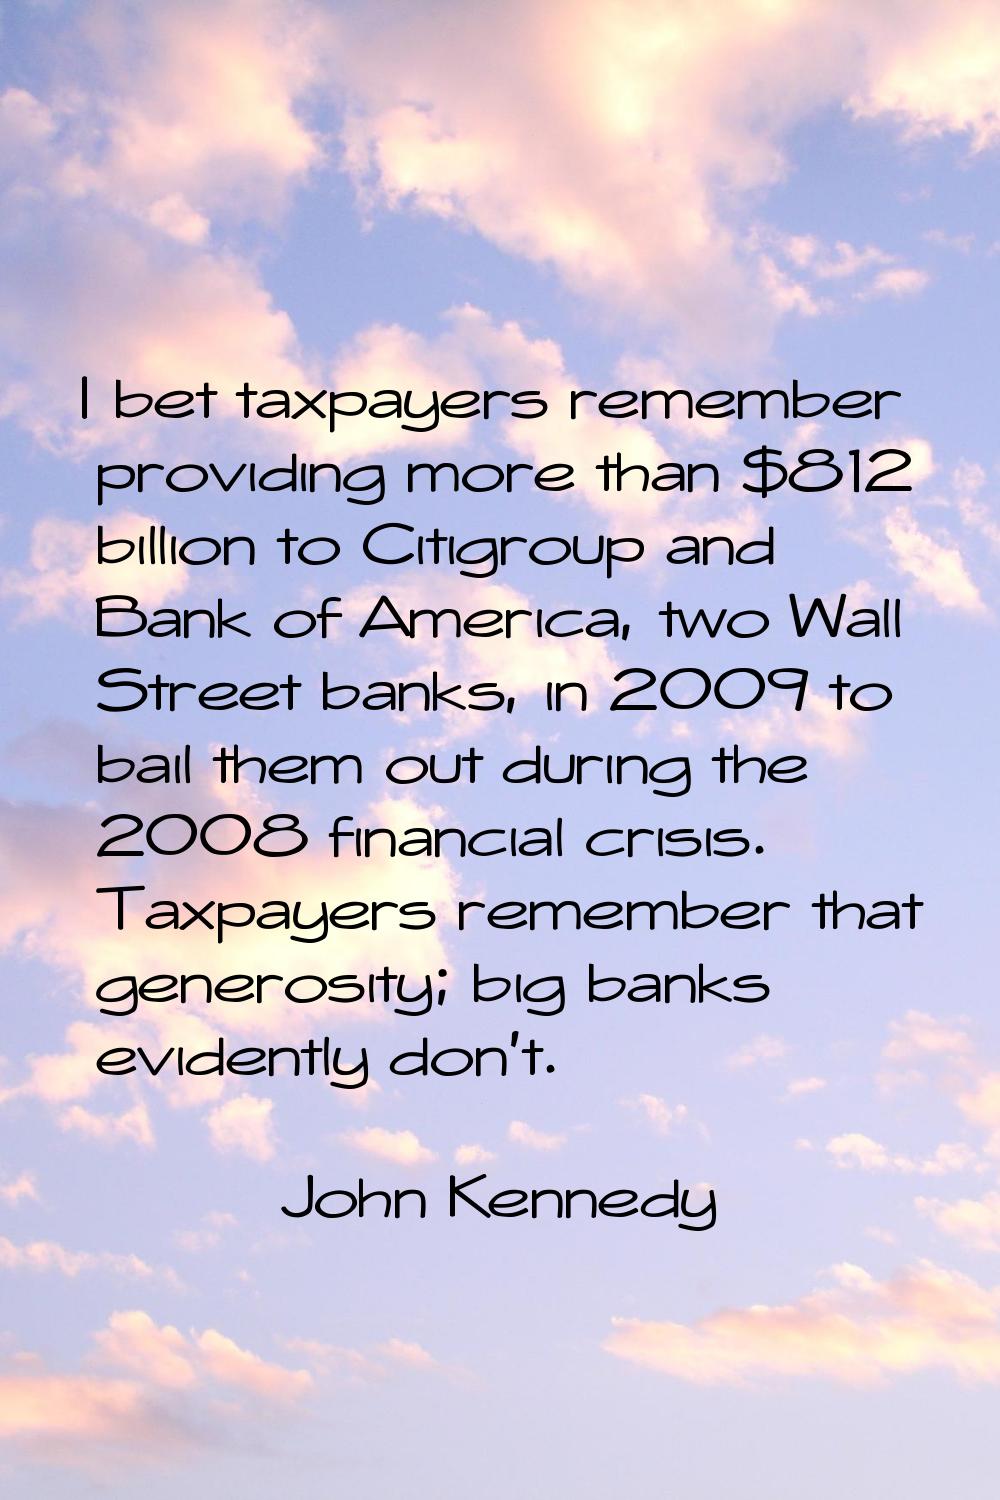 I bet taxpayers remember providing more than $812 billion to Citigroup and Bank of America, two Wal